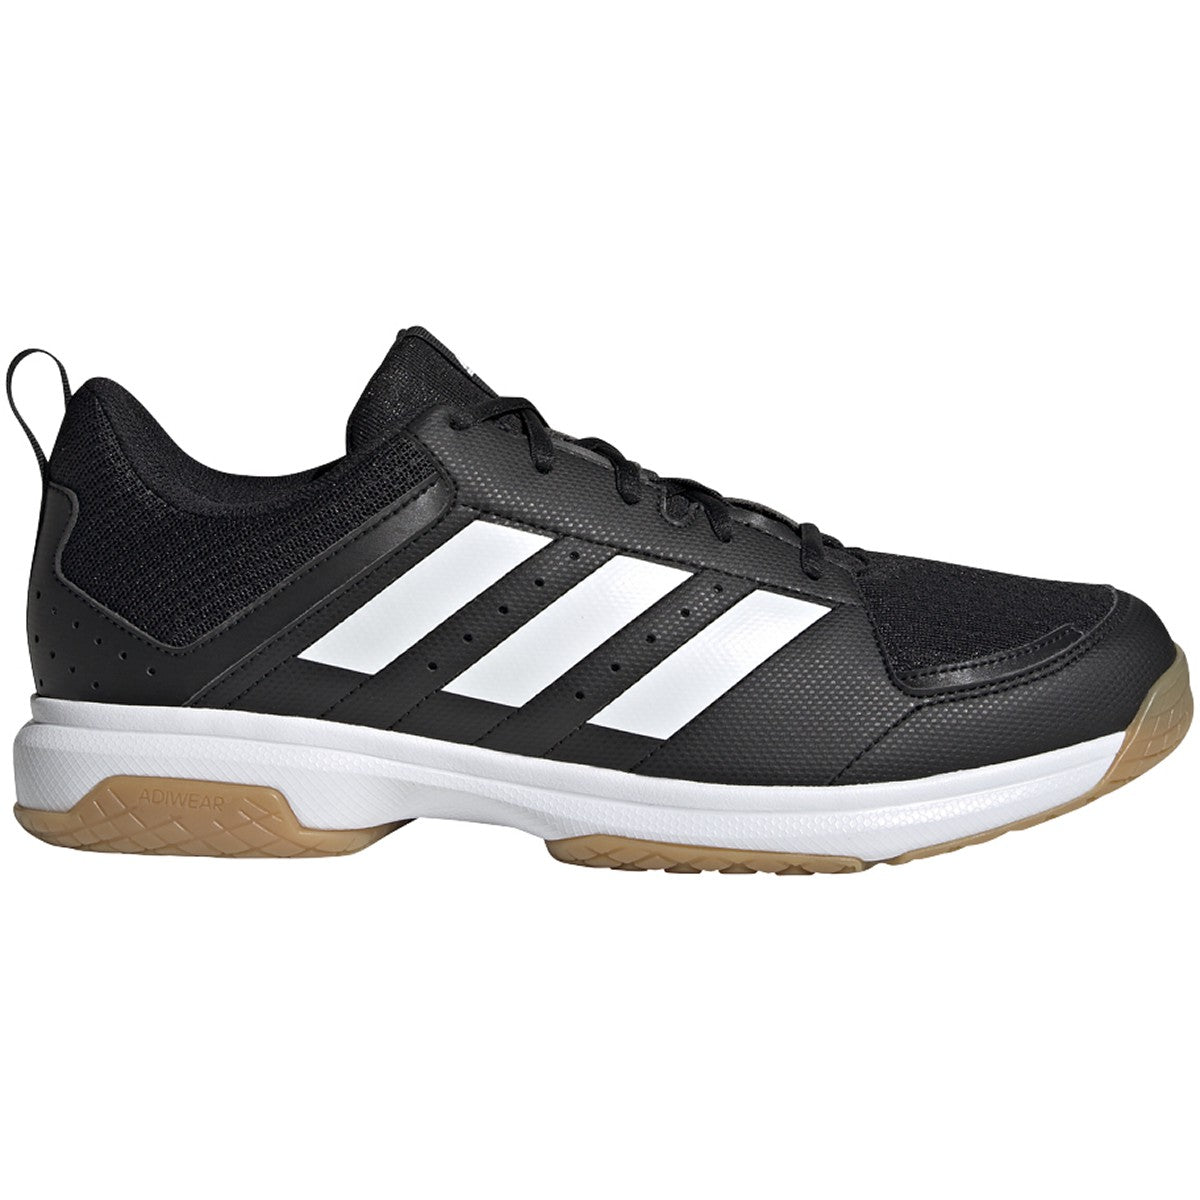 Indoor 7 Shoes League Ligra Outfitters adidas – Mens